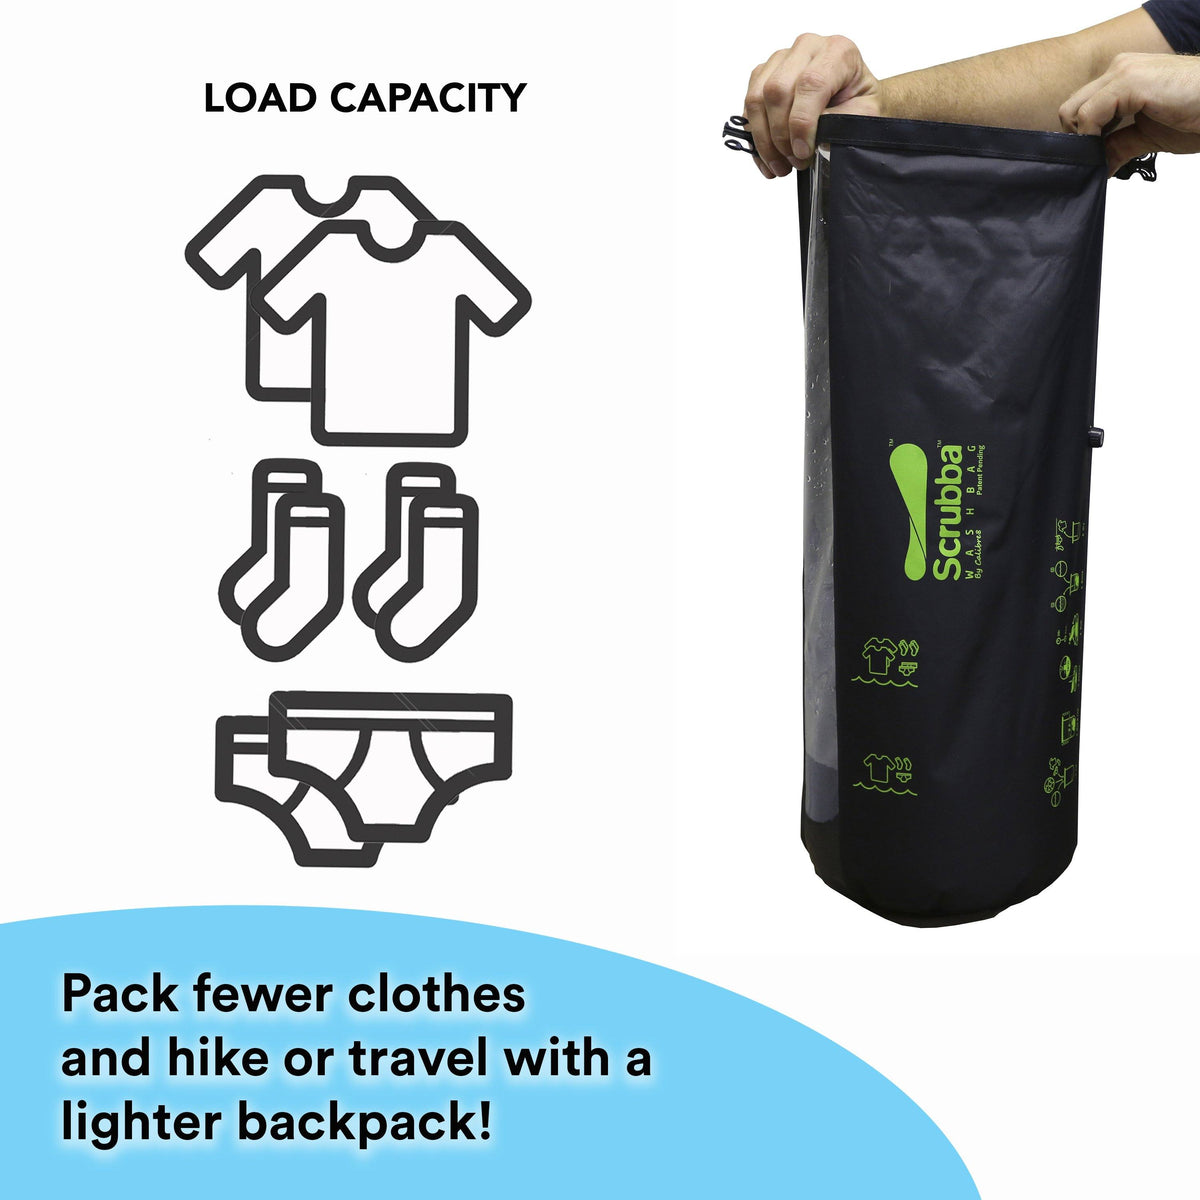 Scrubba Washing Bag & Why Every Traveller Needs One - Simply Plastic Free